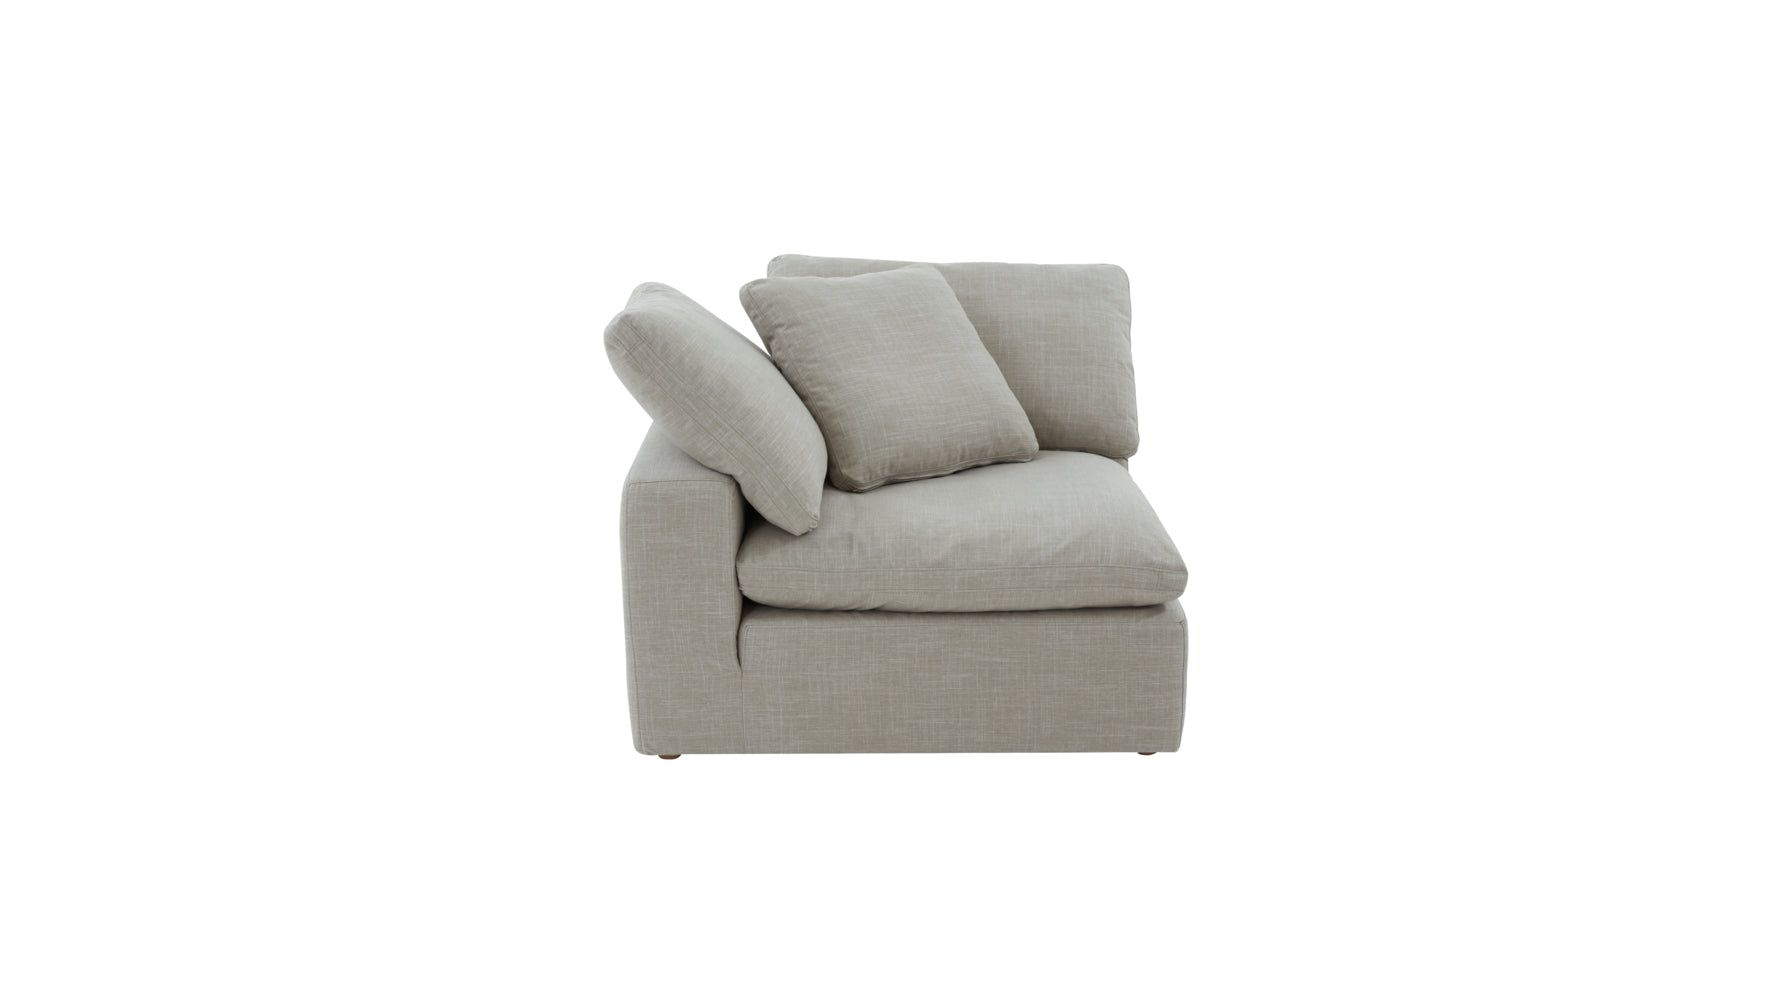 Movie Night™ Corner Chair, Large, Light Pebble (Left or Right) - Image 5